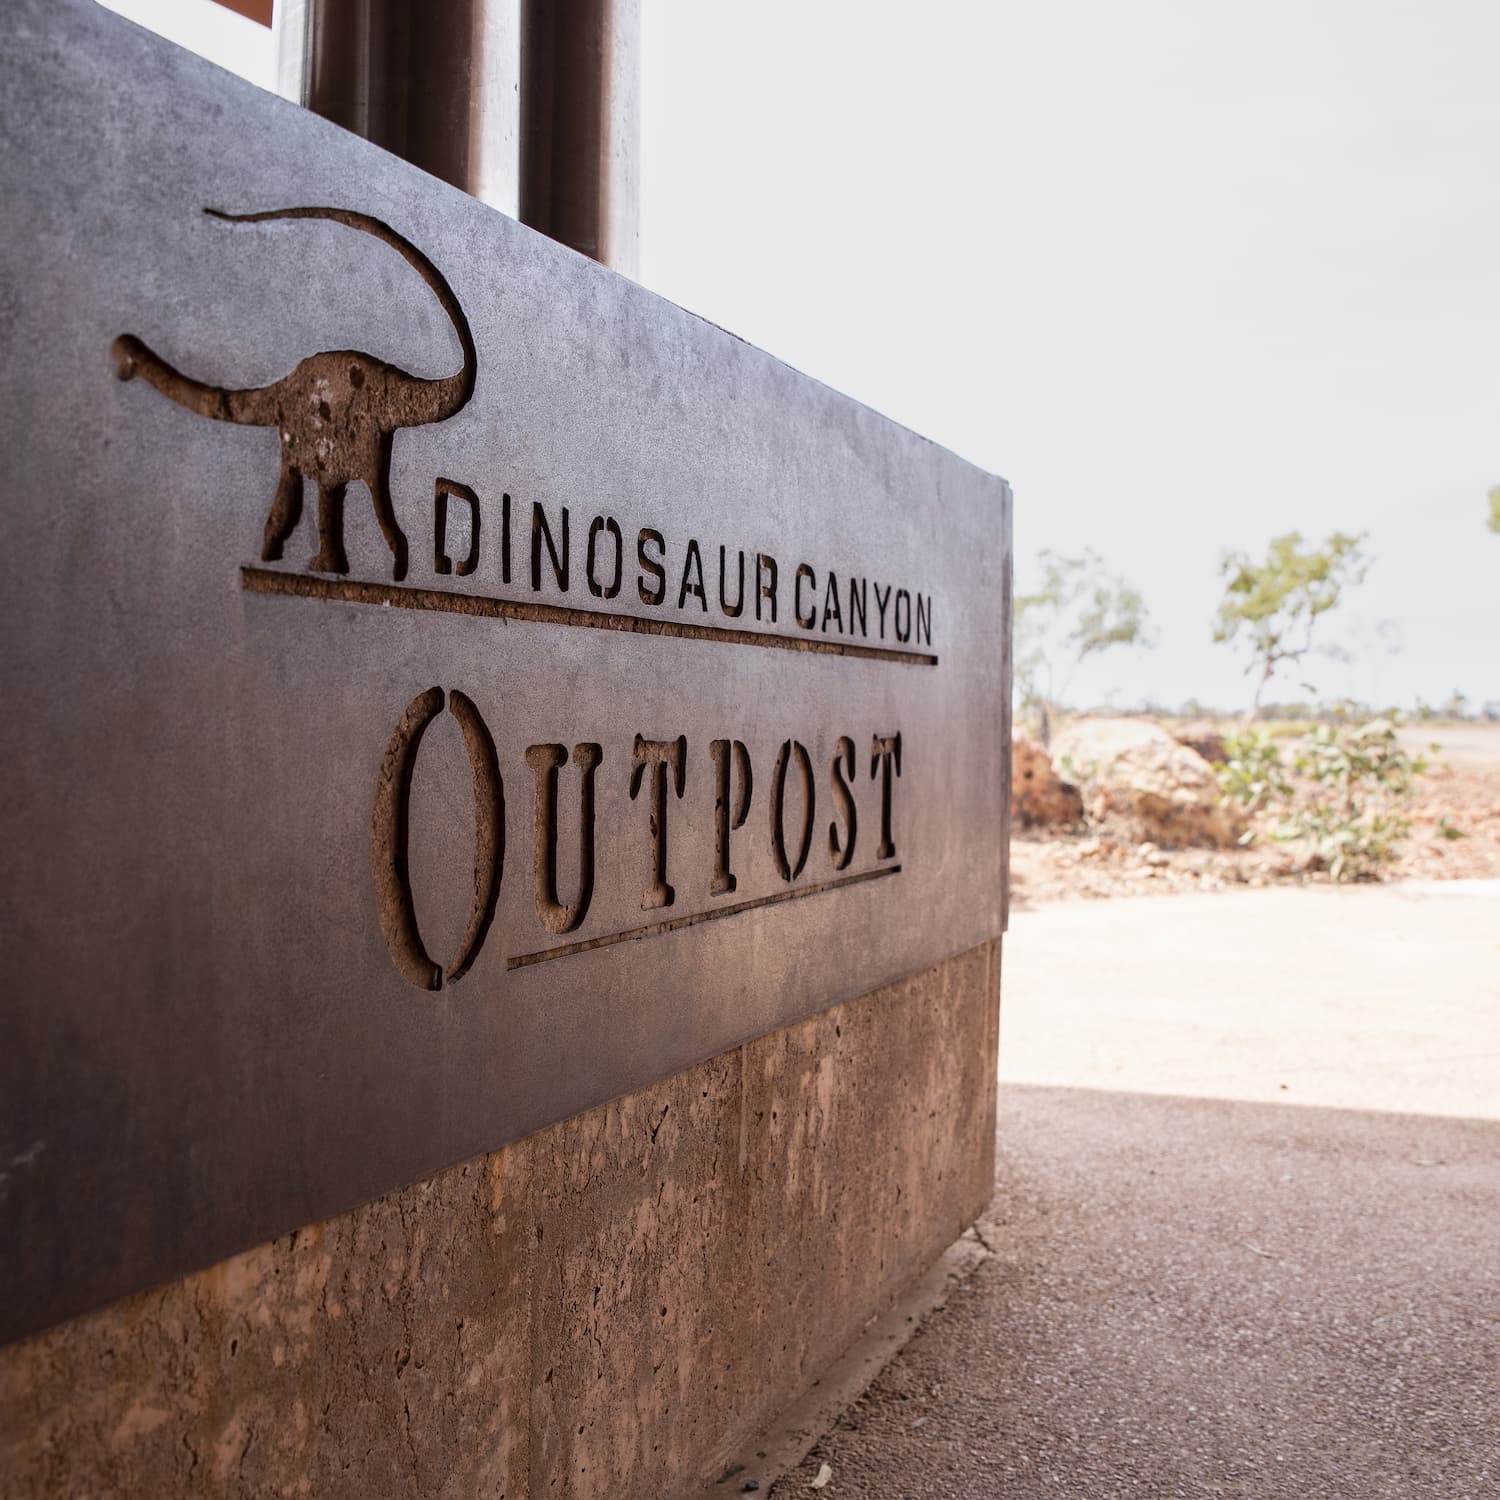 Dinosaur Canyon Outpost sign